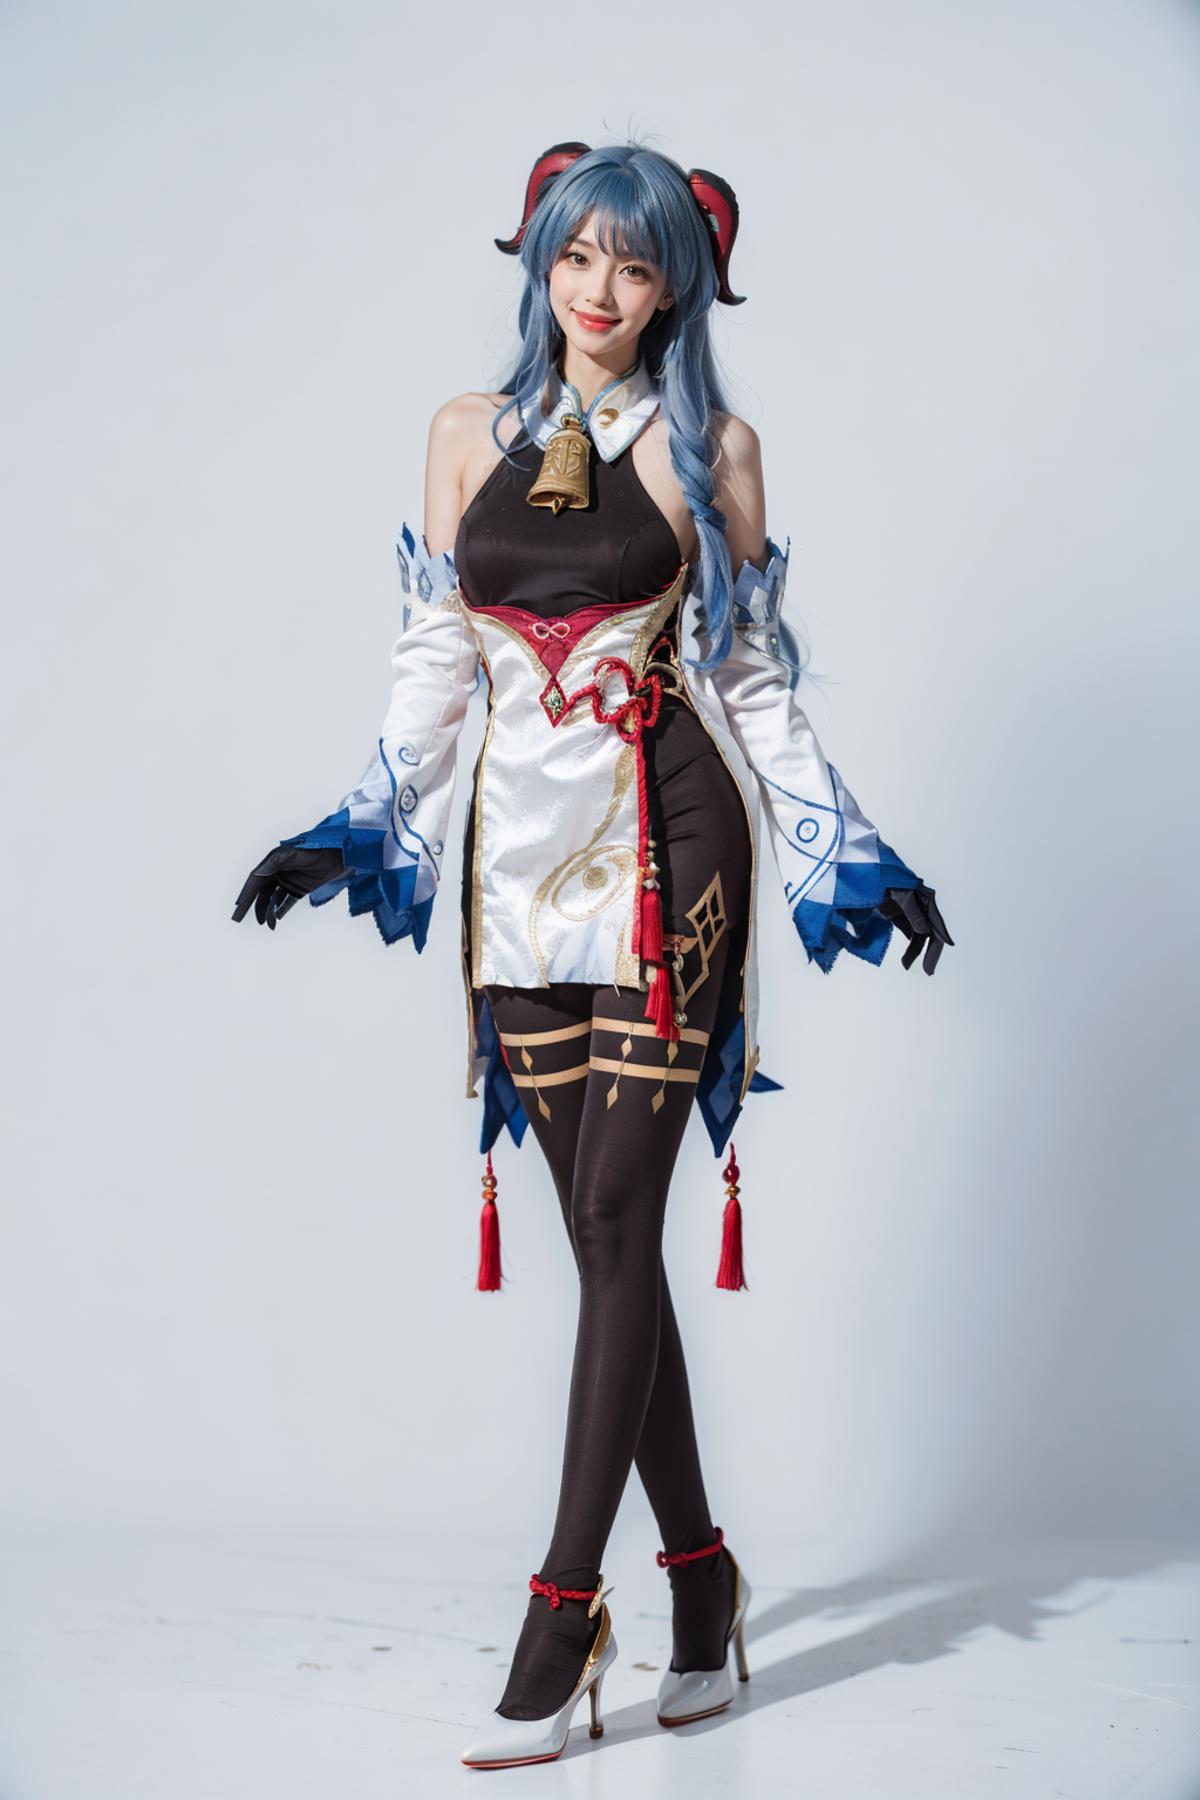 [Realistic] <Genshin Impact> Cosplay costume collection | 原神 cos 服装集合 image by cyberAngel_